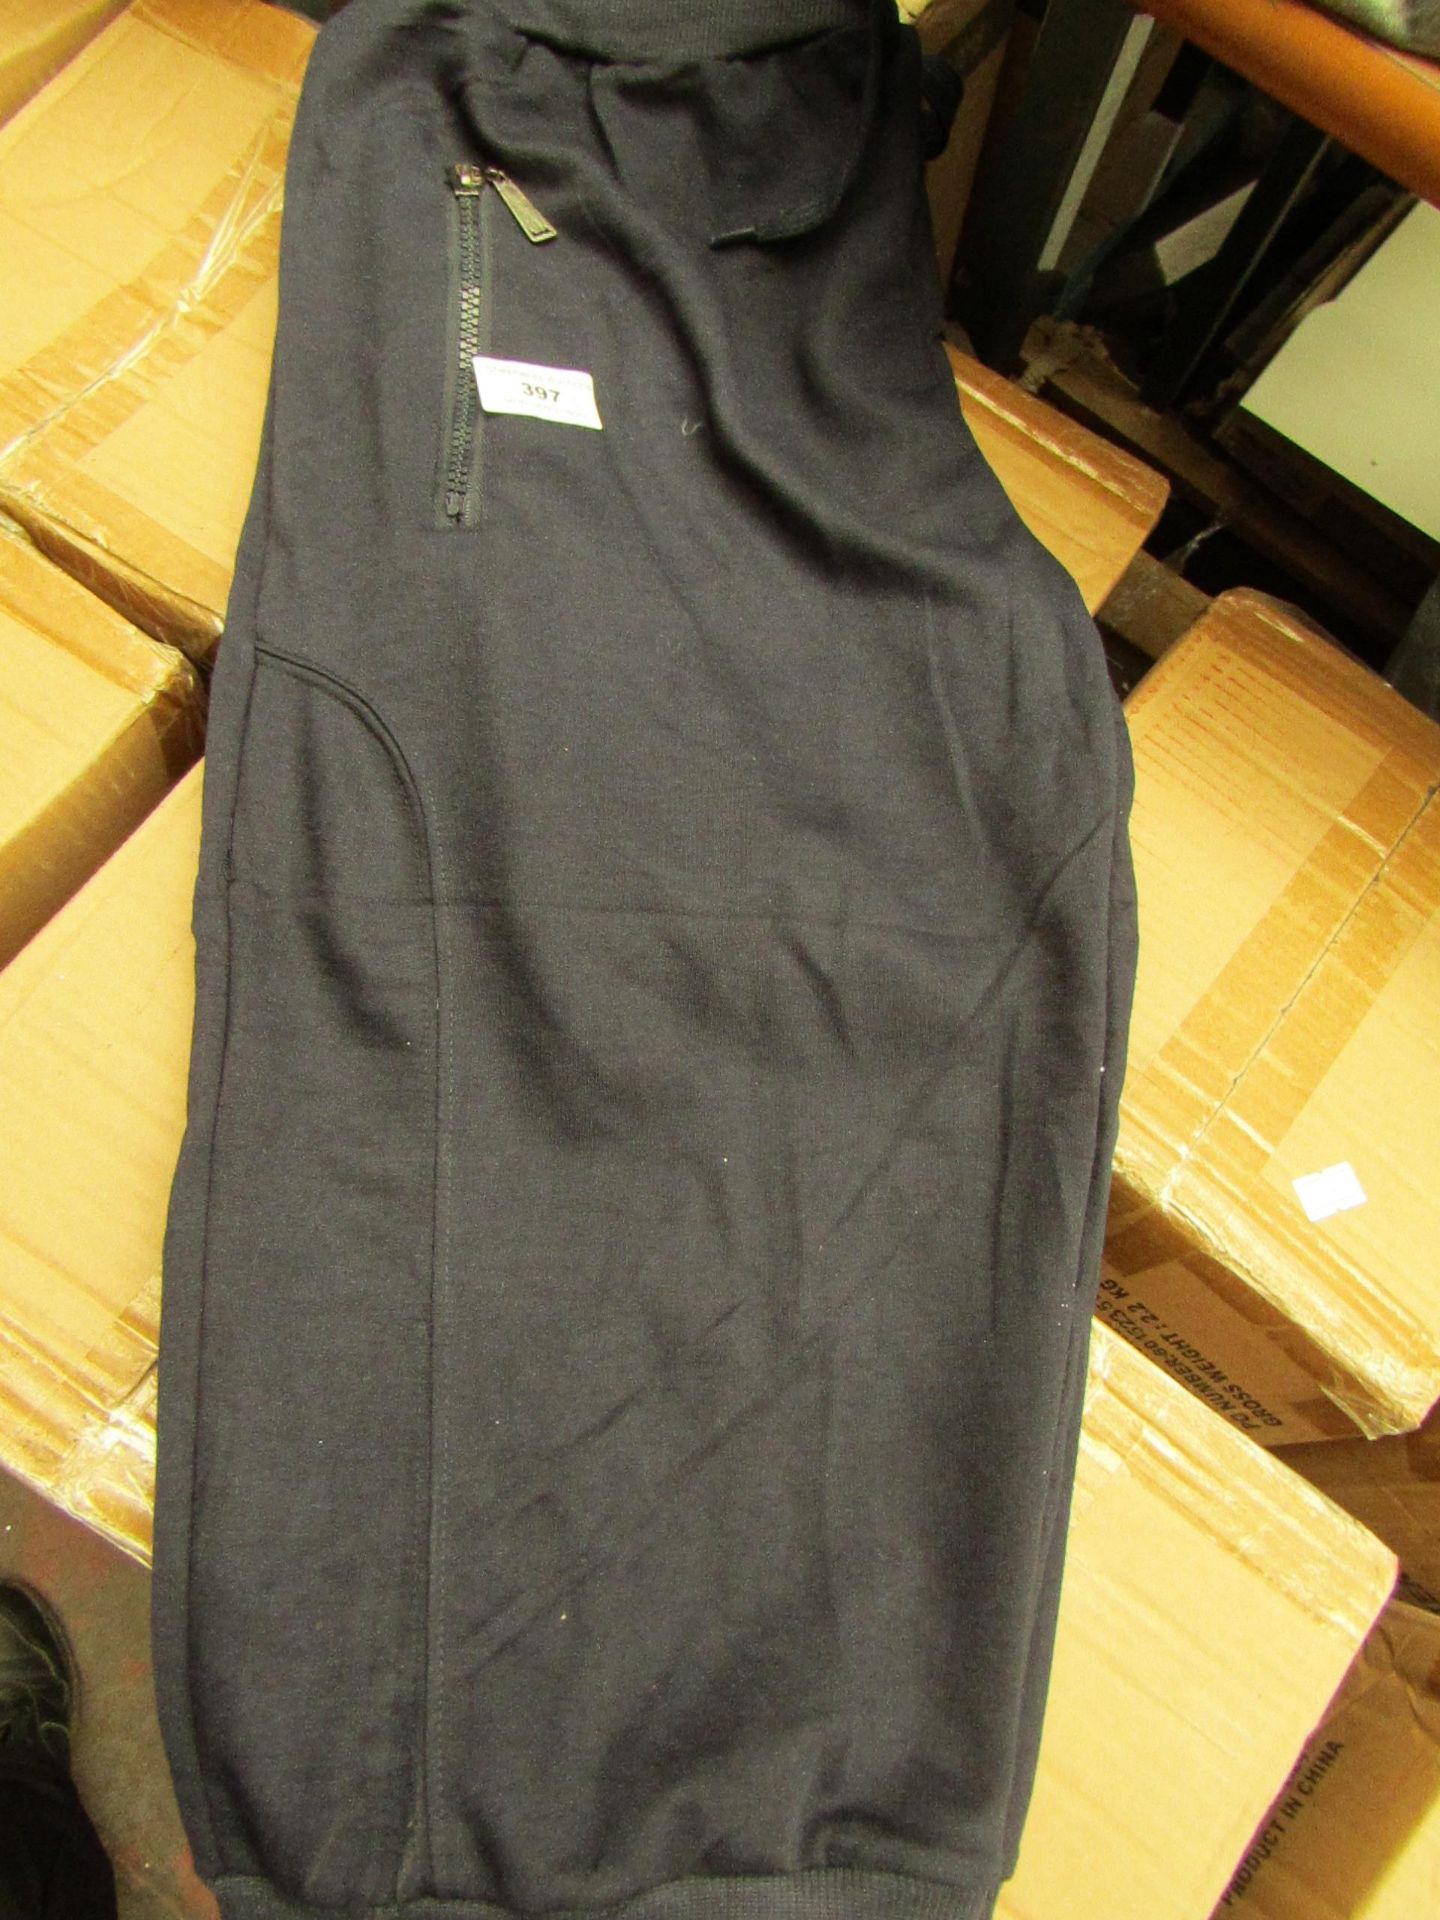 Newport - Black Jogger Shorts - Size L - Good Condition with Original Tags.